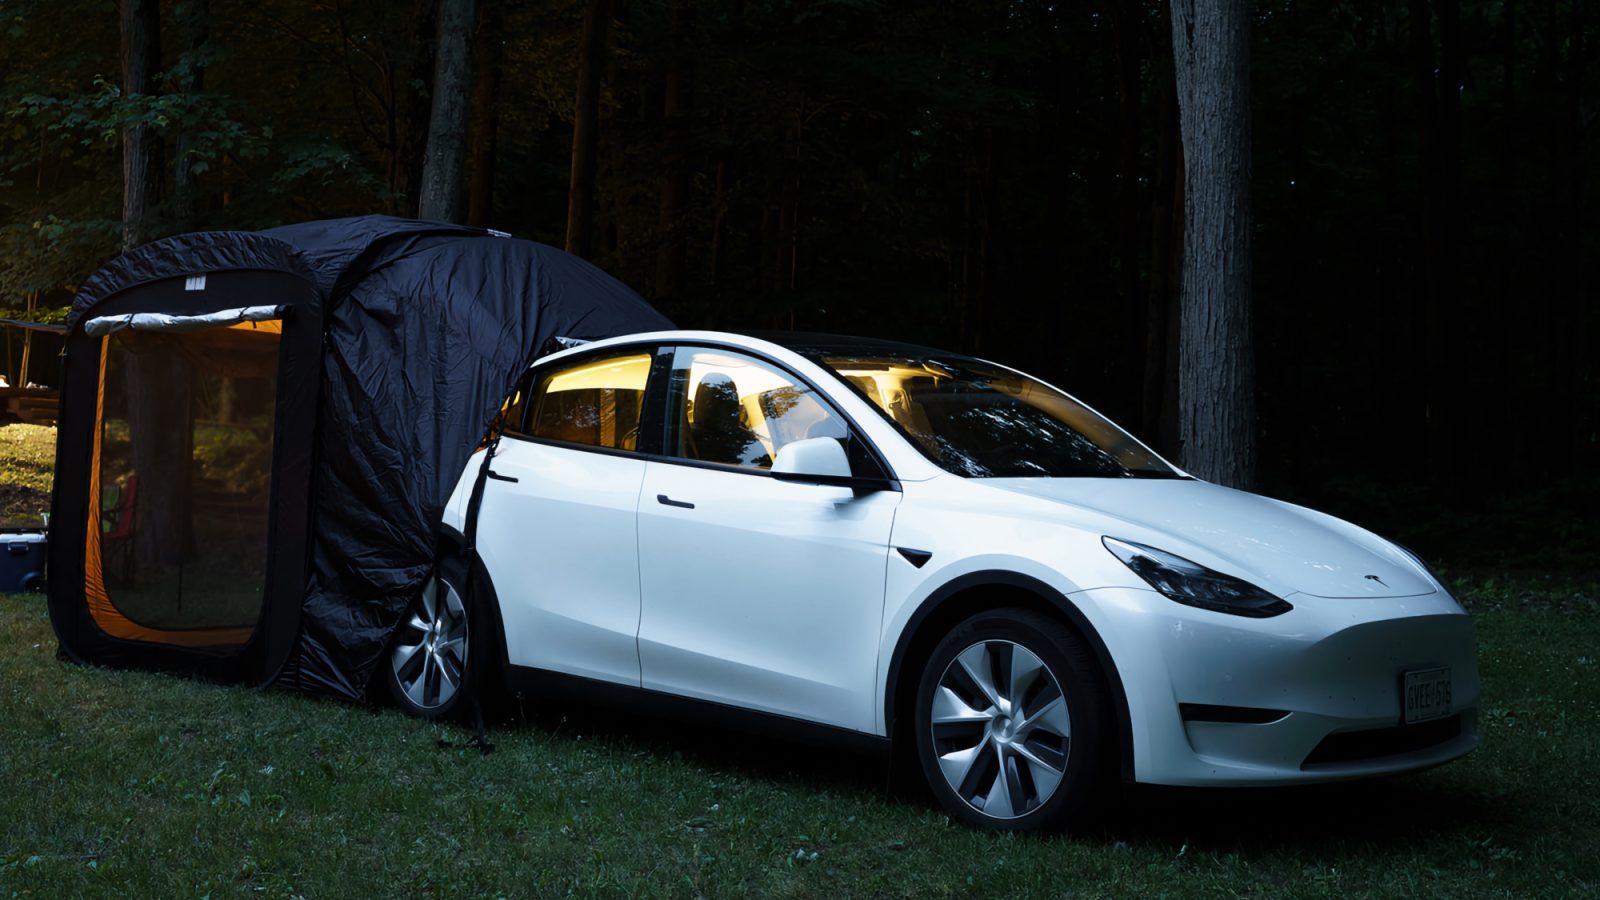 Tesloid's new Camping Tent is designed perfectly for your Model Y